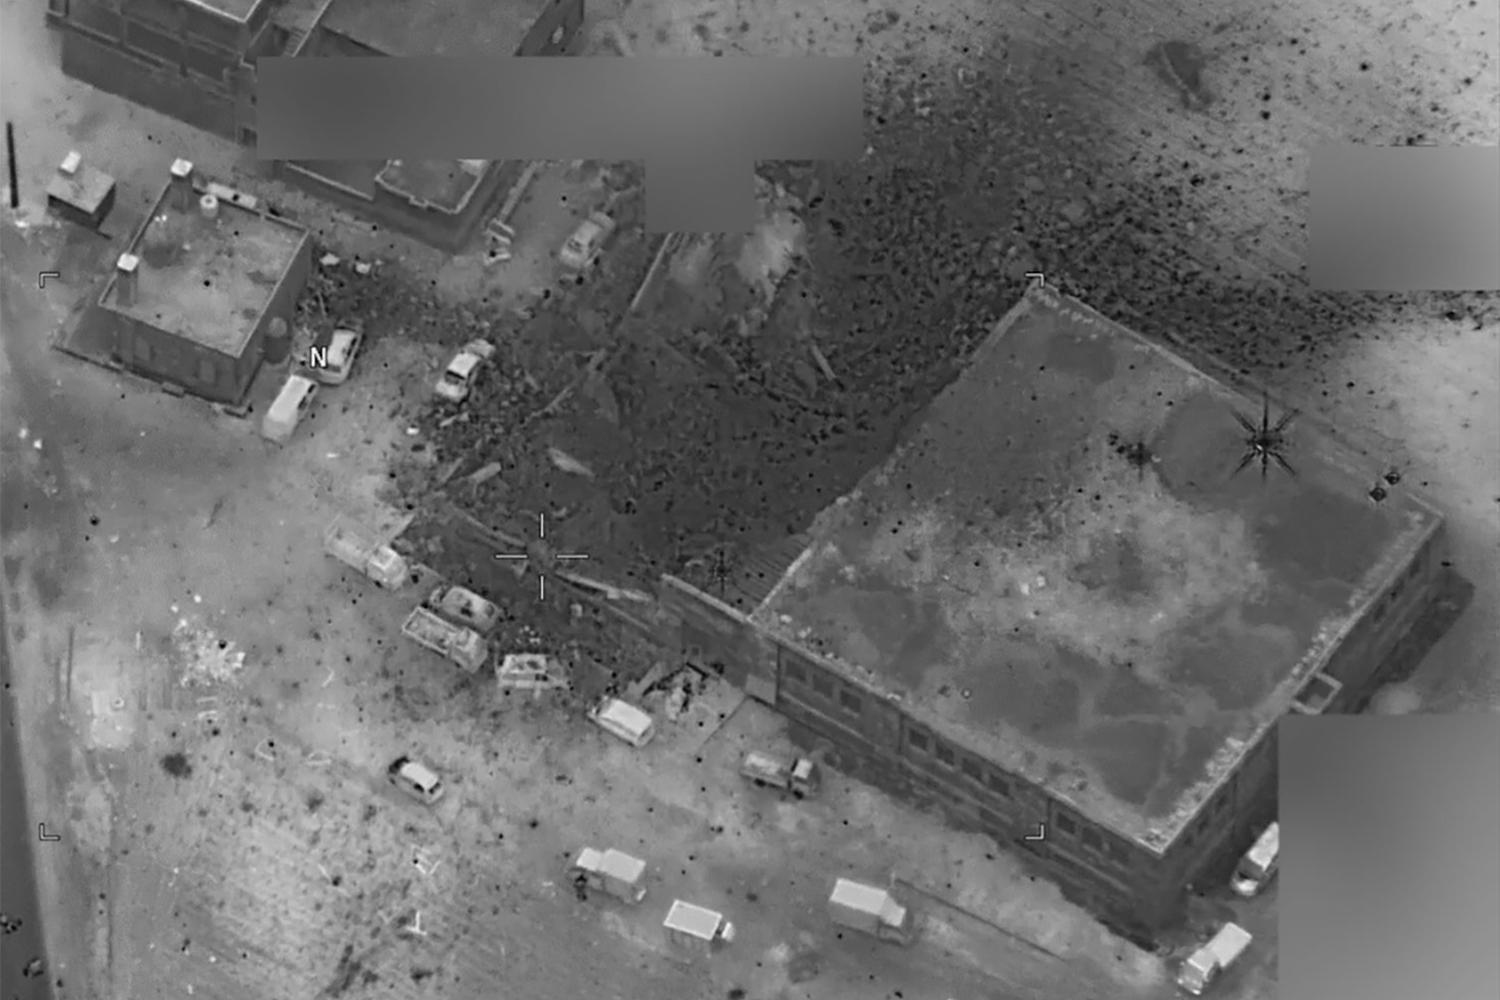 An aerial photograph released by the US Department of Defense after a March 16, 2017 US airstrike in al-Jinah, Syria, showing damage to part of a mosque.